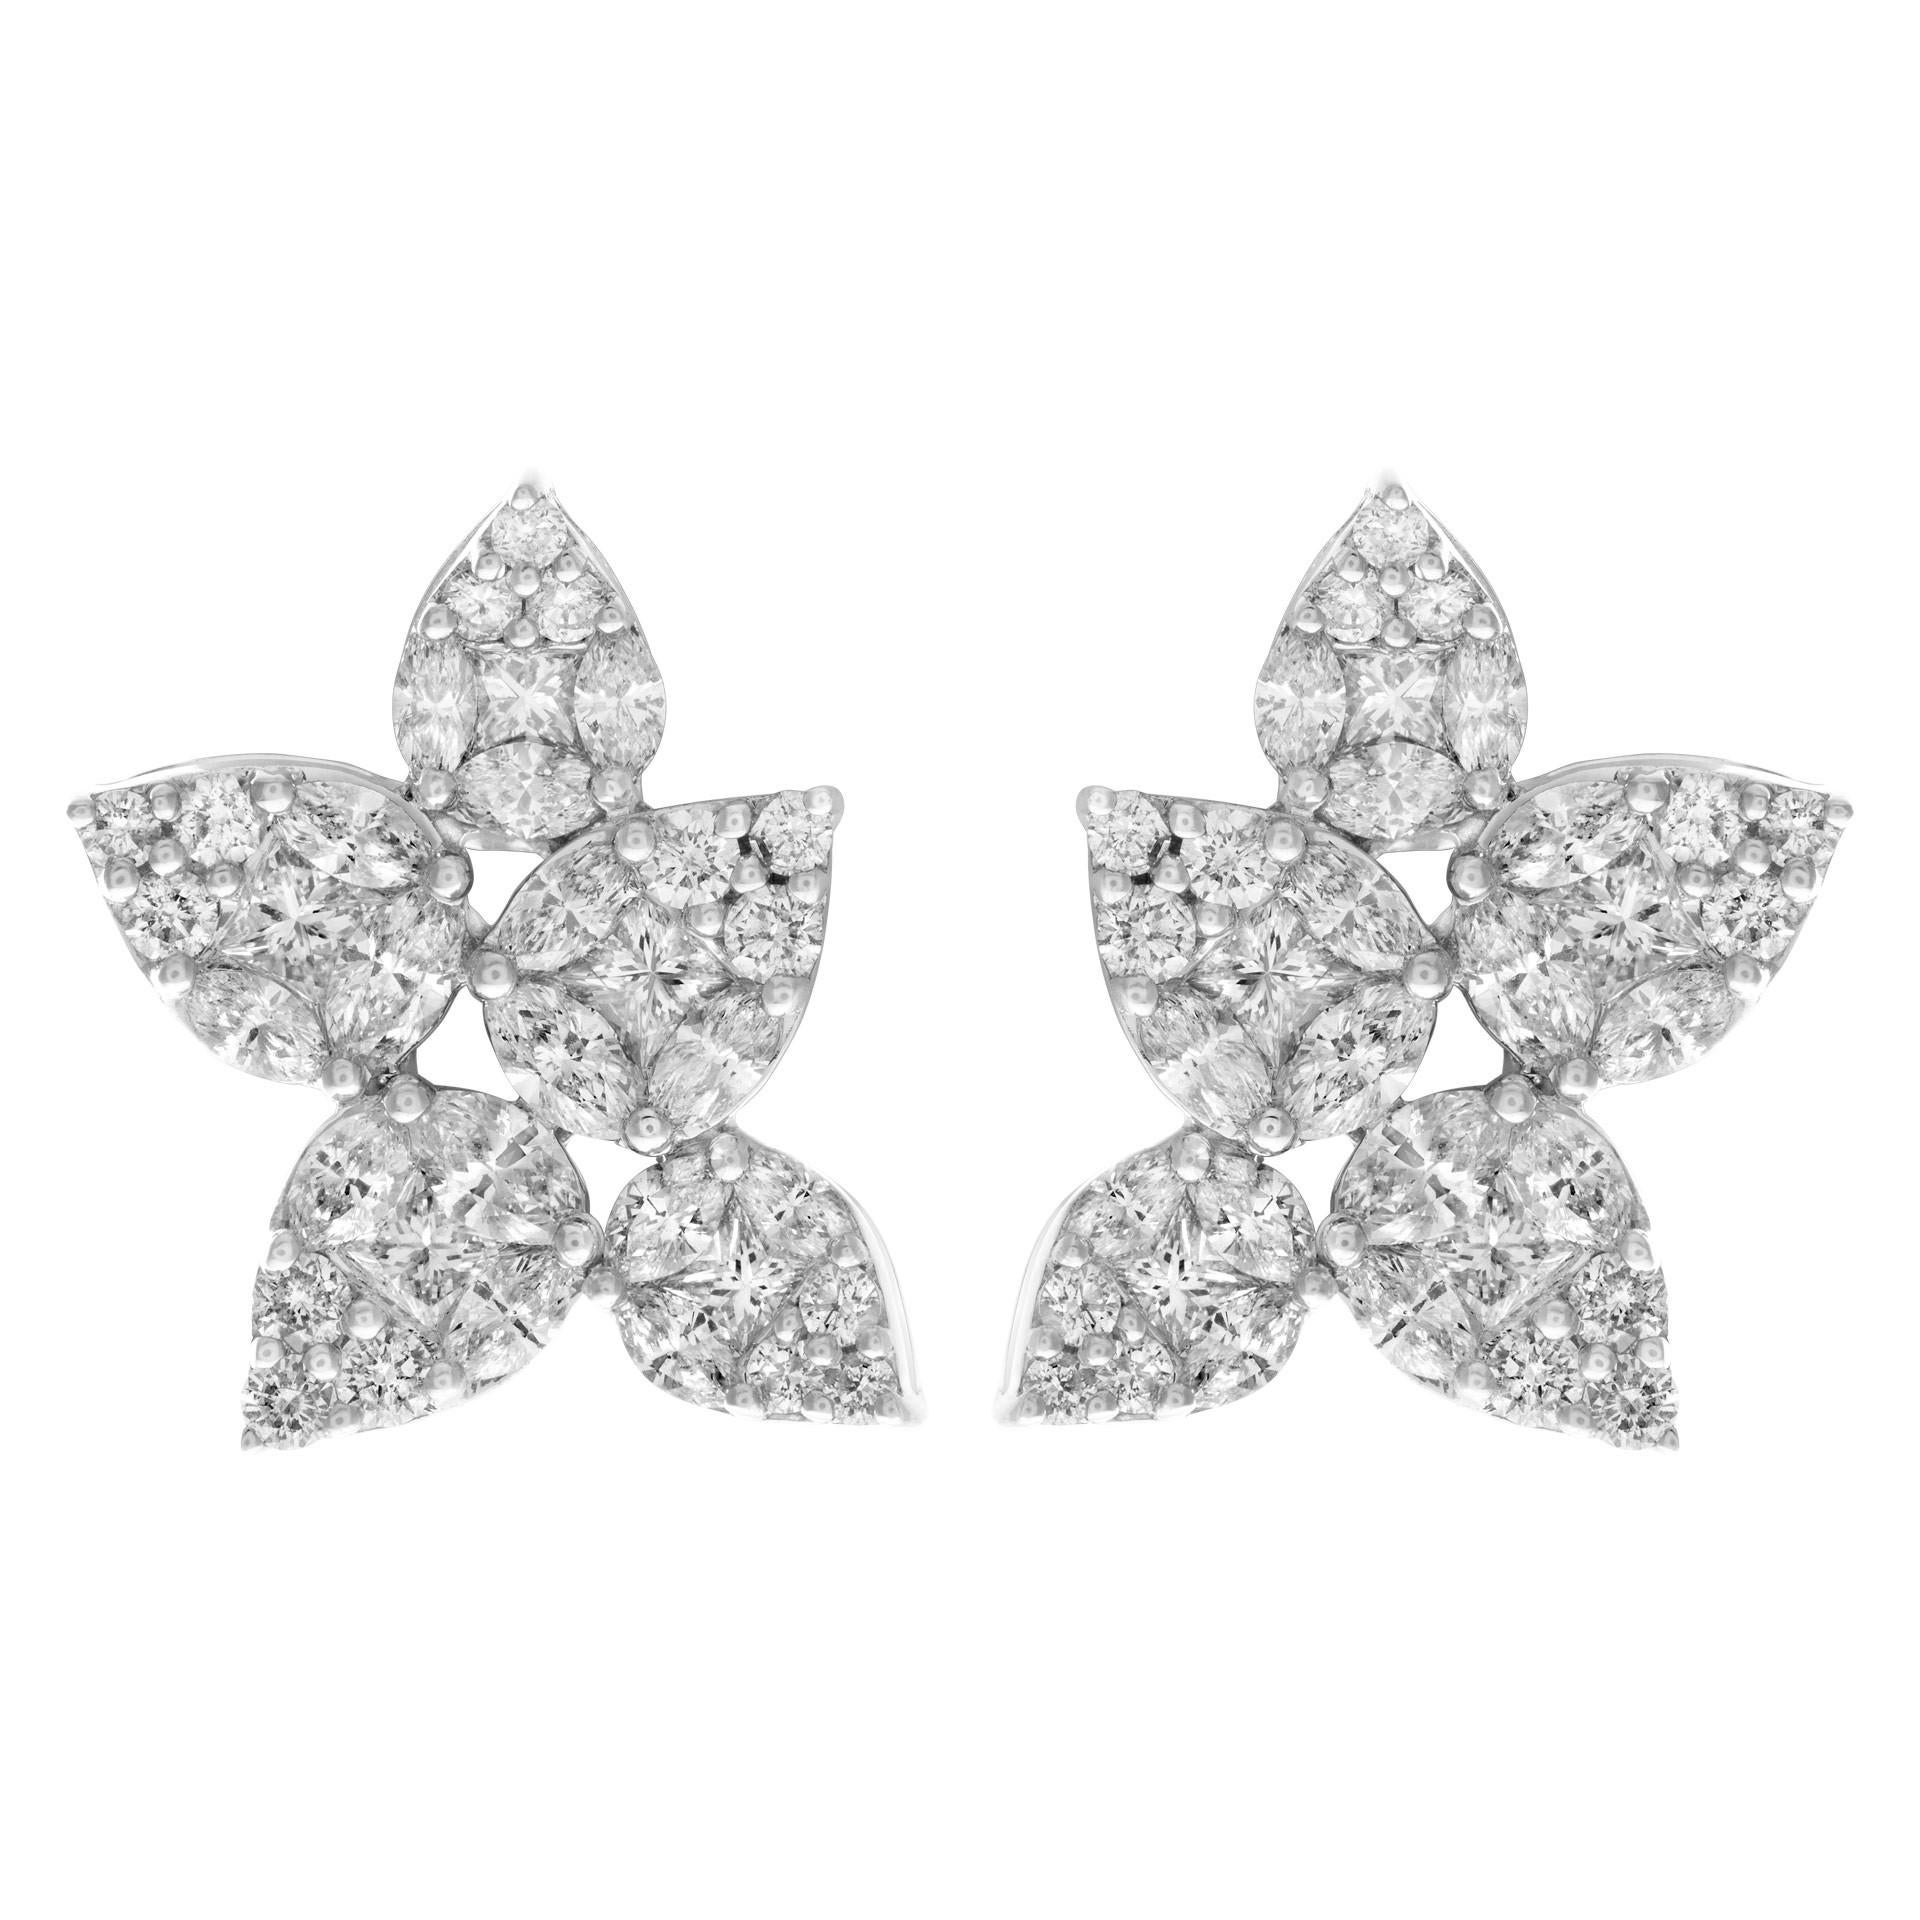 ESTIMATED RETAIL: $19,800 YOUR PRICE: $12,980 - Flower earrings made up of approximately 4.50 carats of diamonds in a mosaic style! Approximately - marquise (2.40 carats), princess (1.50 carats) & round (0.60 carats) cut G-H color, VS clarity